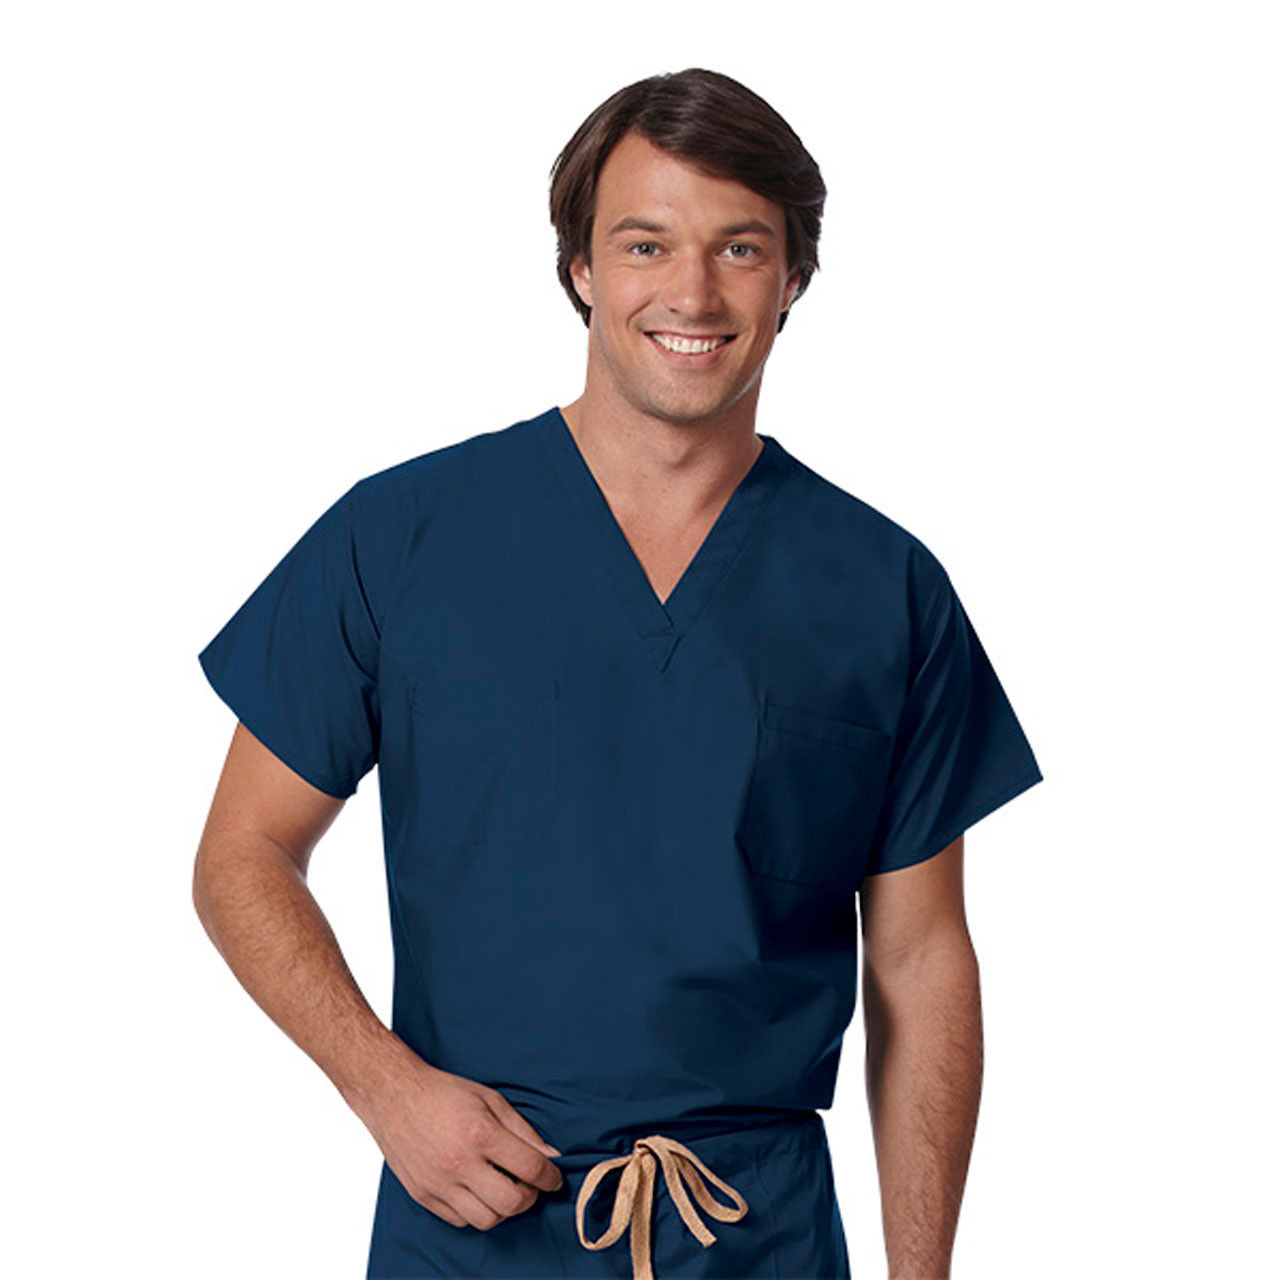 Does the navy surgical scrubs have a drawstring or elastic closure?